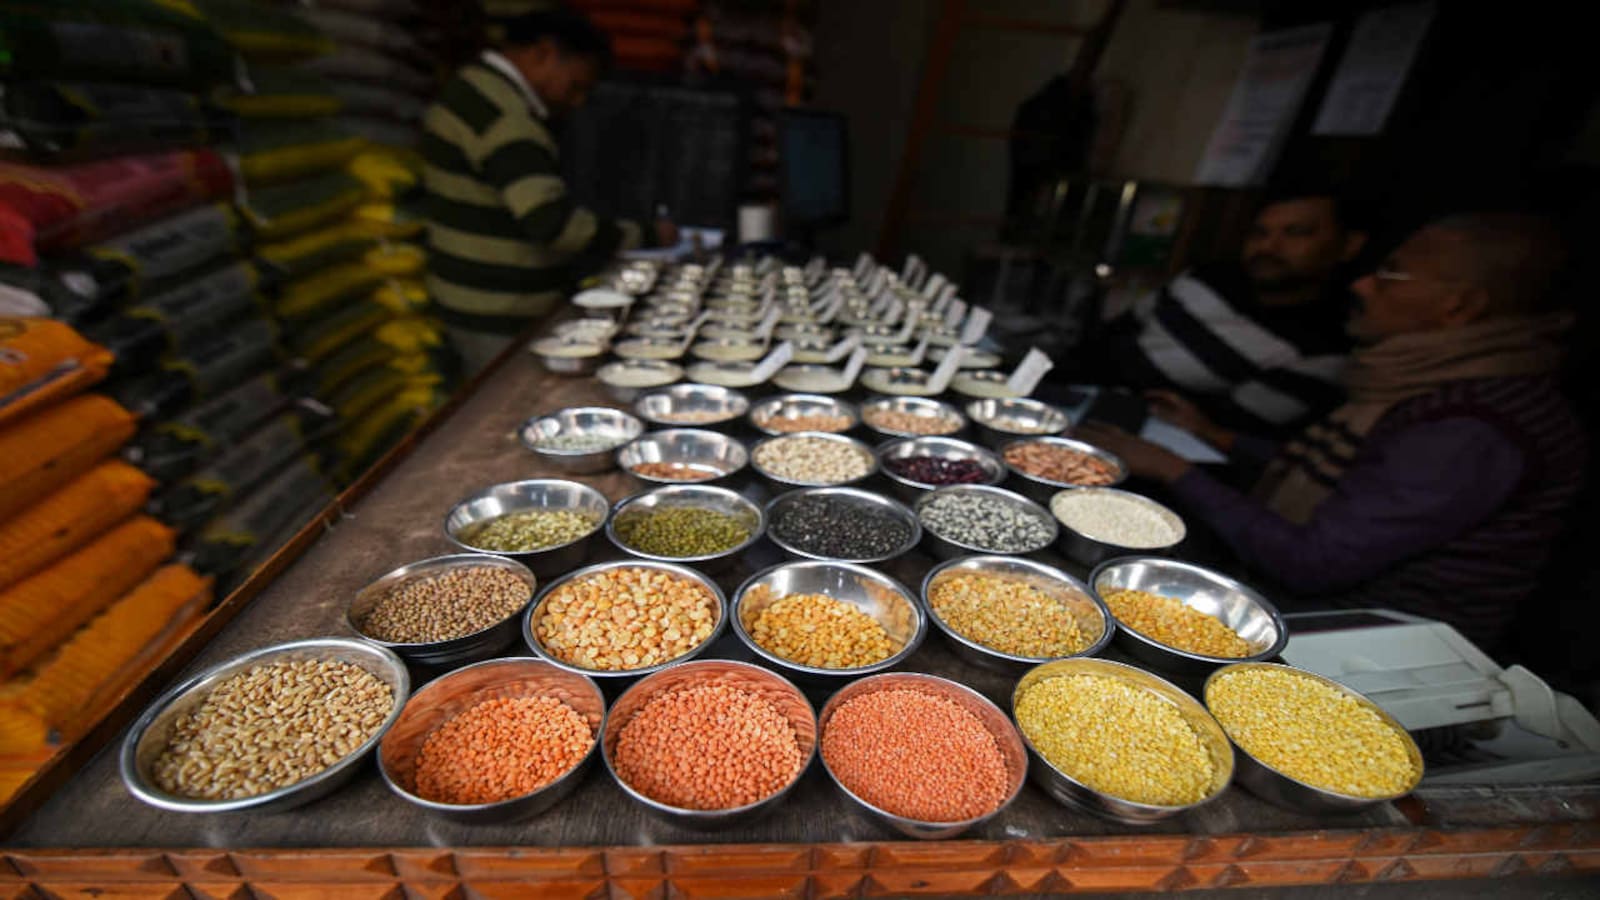 After rice, govt may consider steps to arrest price rise in pulses, wheat:  Source